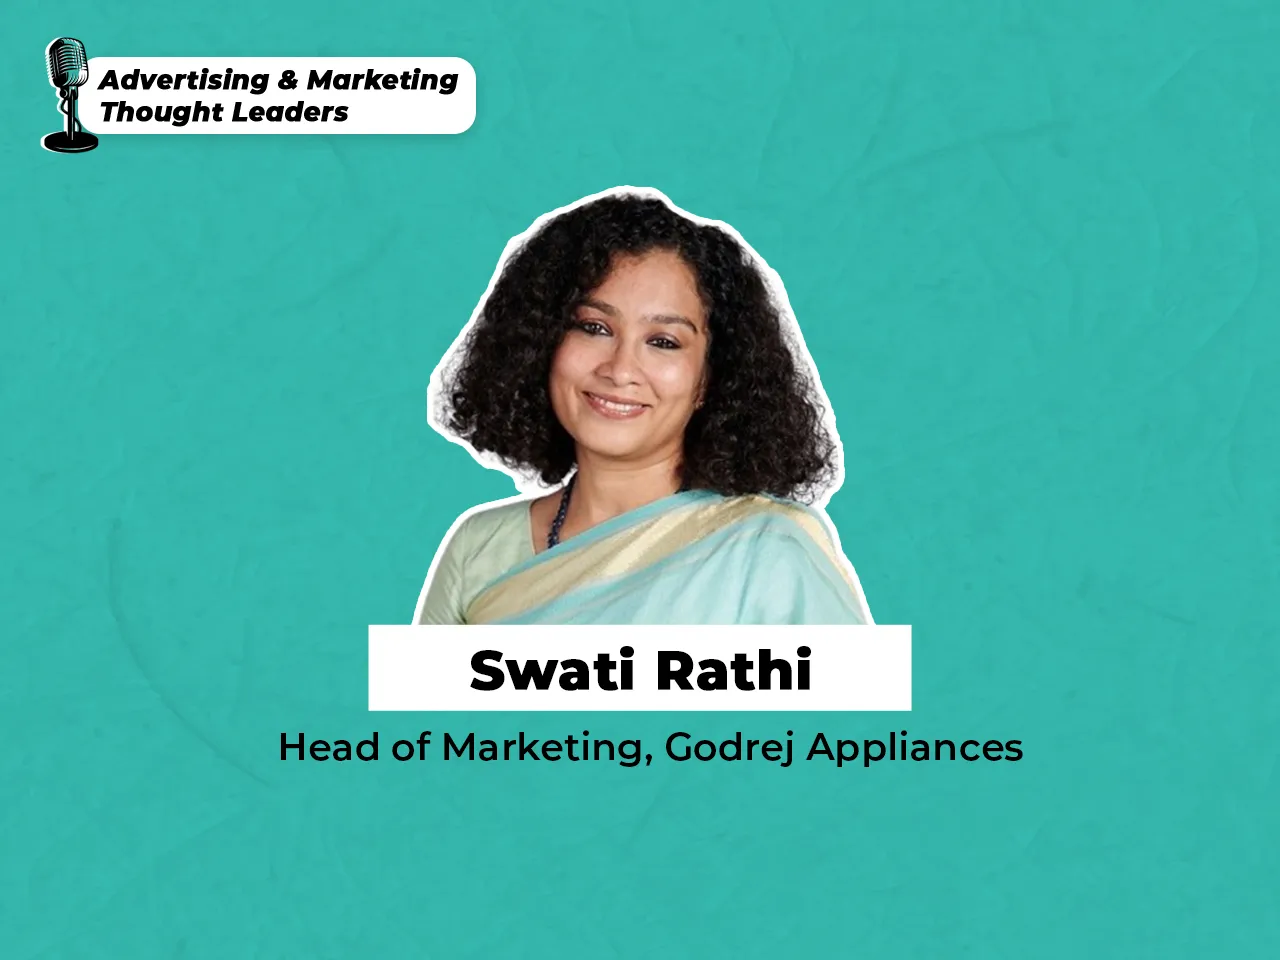 Hyper-personalised content backed by predictive analytics, promises to redefine A&M approaches: Swati Rathi